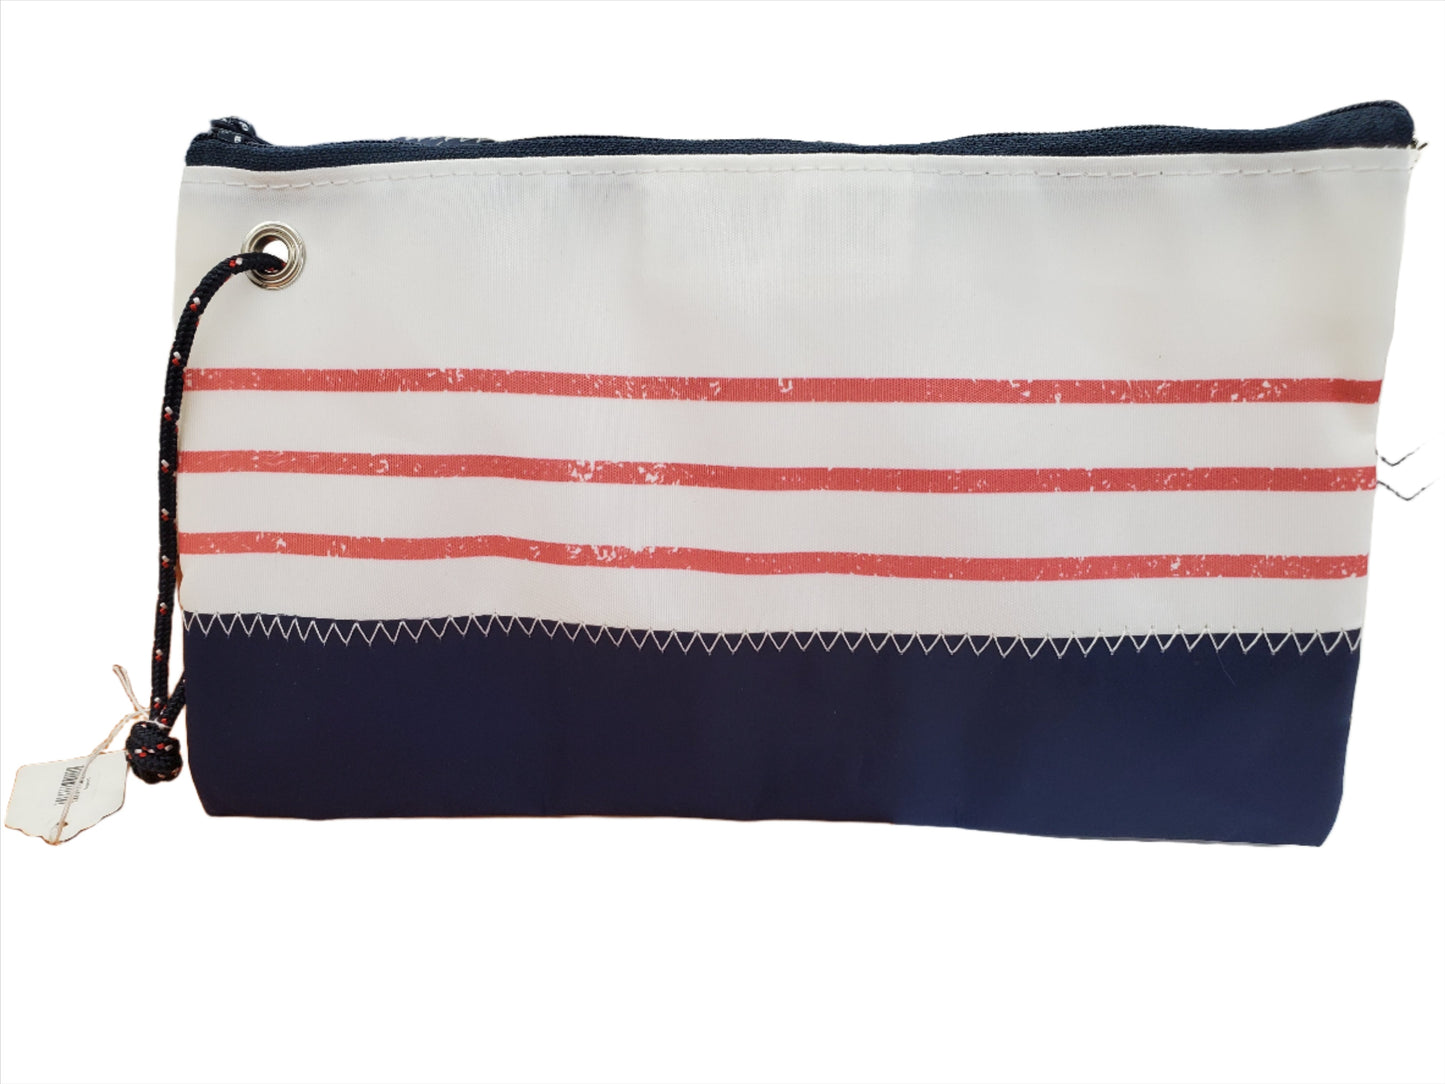 Seabag - Zippered Hand Pouch, Red White and Blue